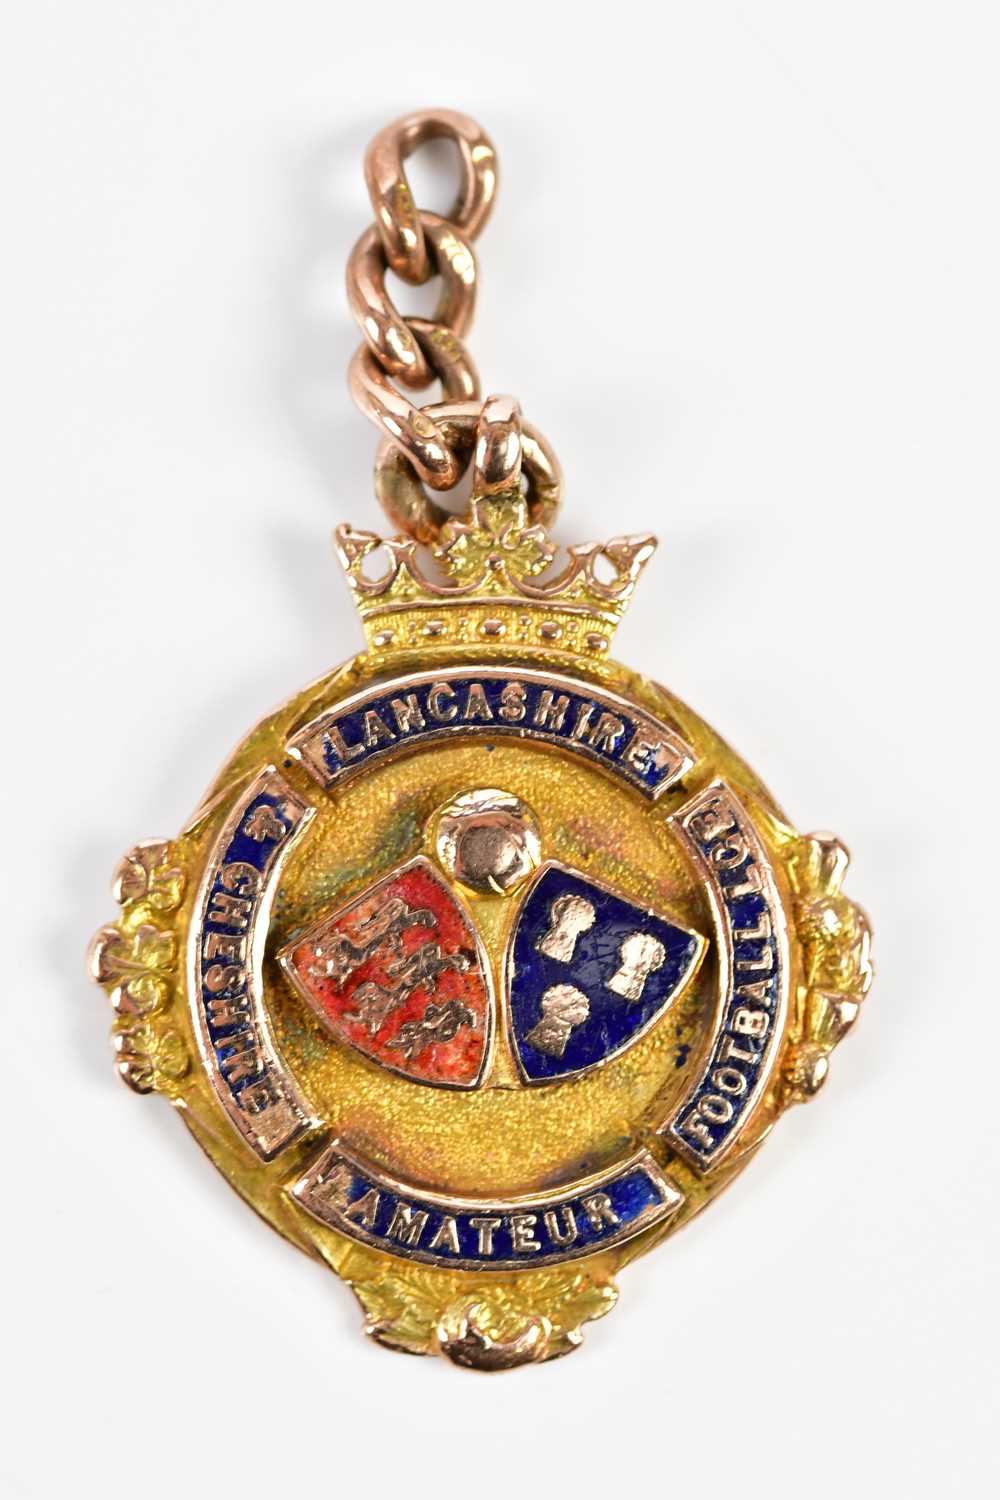 LANCASHIRE & CHESHIRE AMATEUR FOOTBALL; a 9ct yellow gold and enamel winners' medal, awarded to J